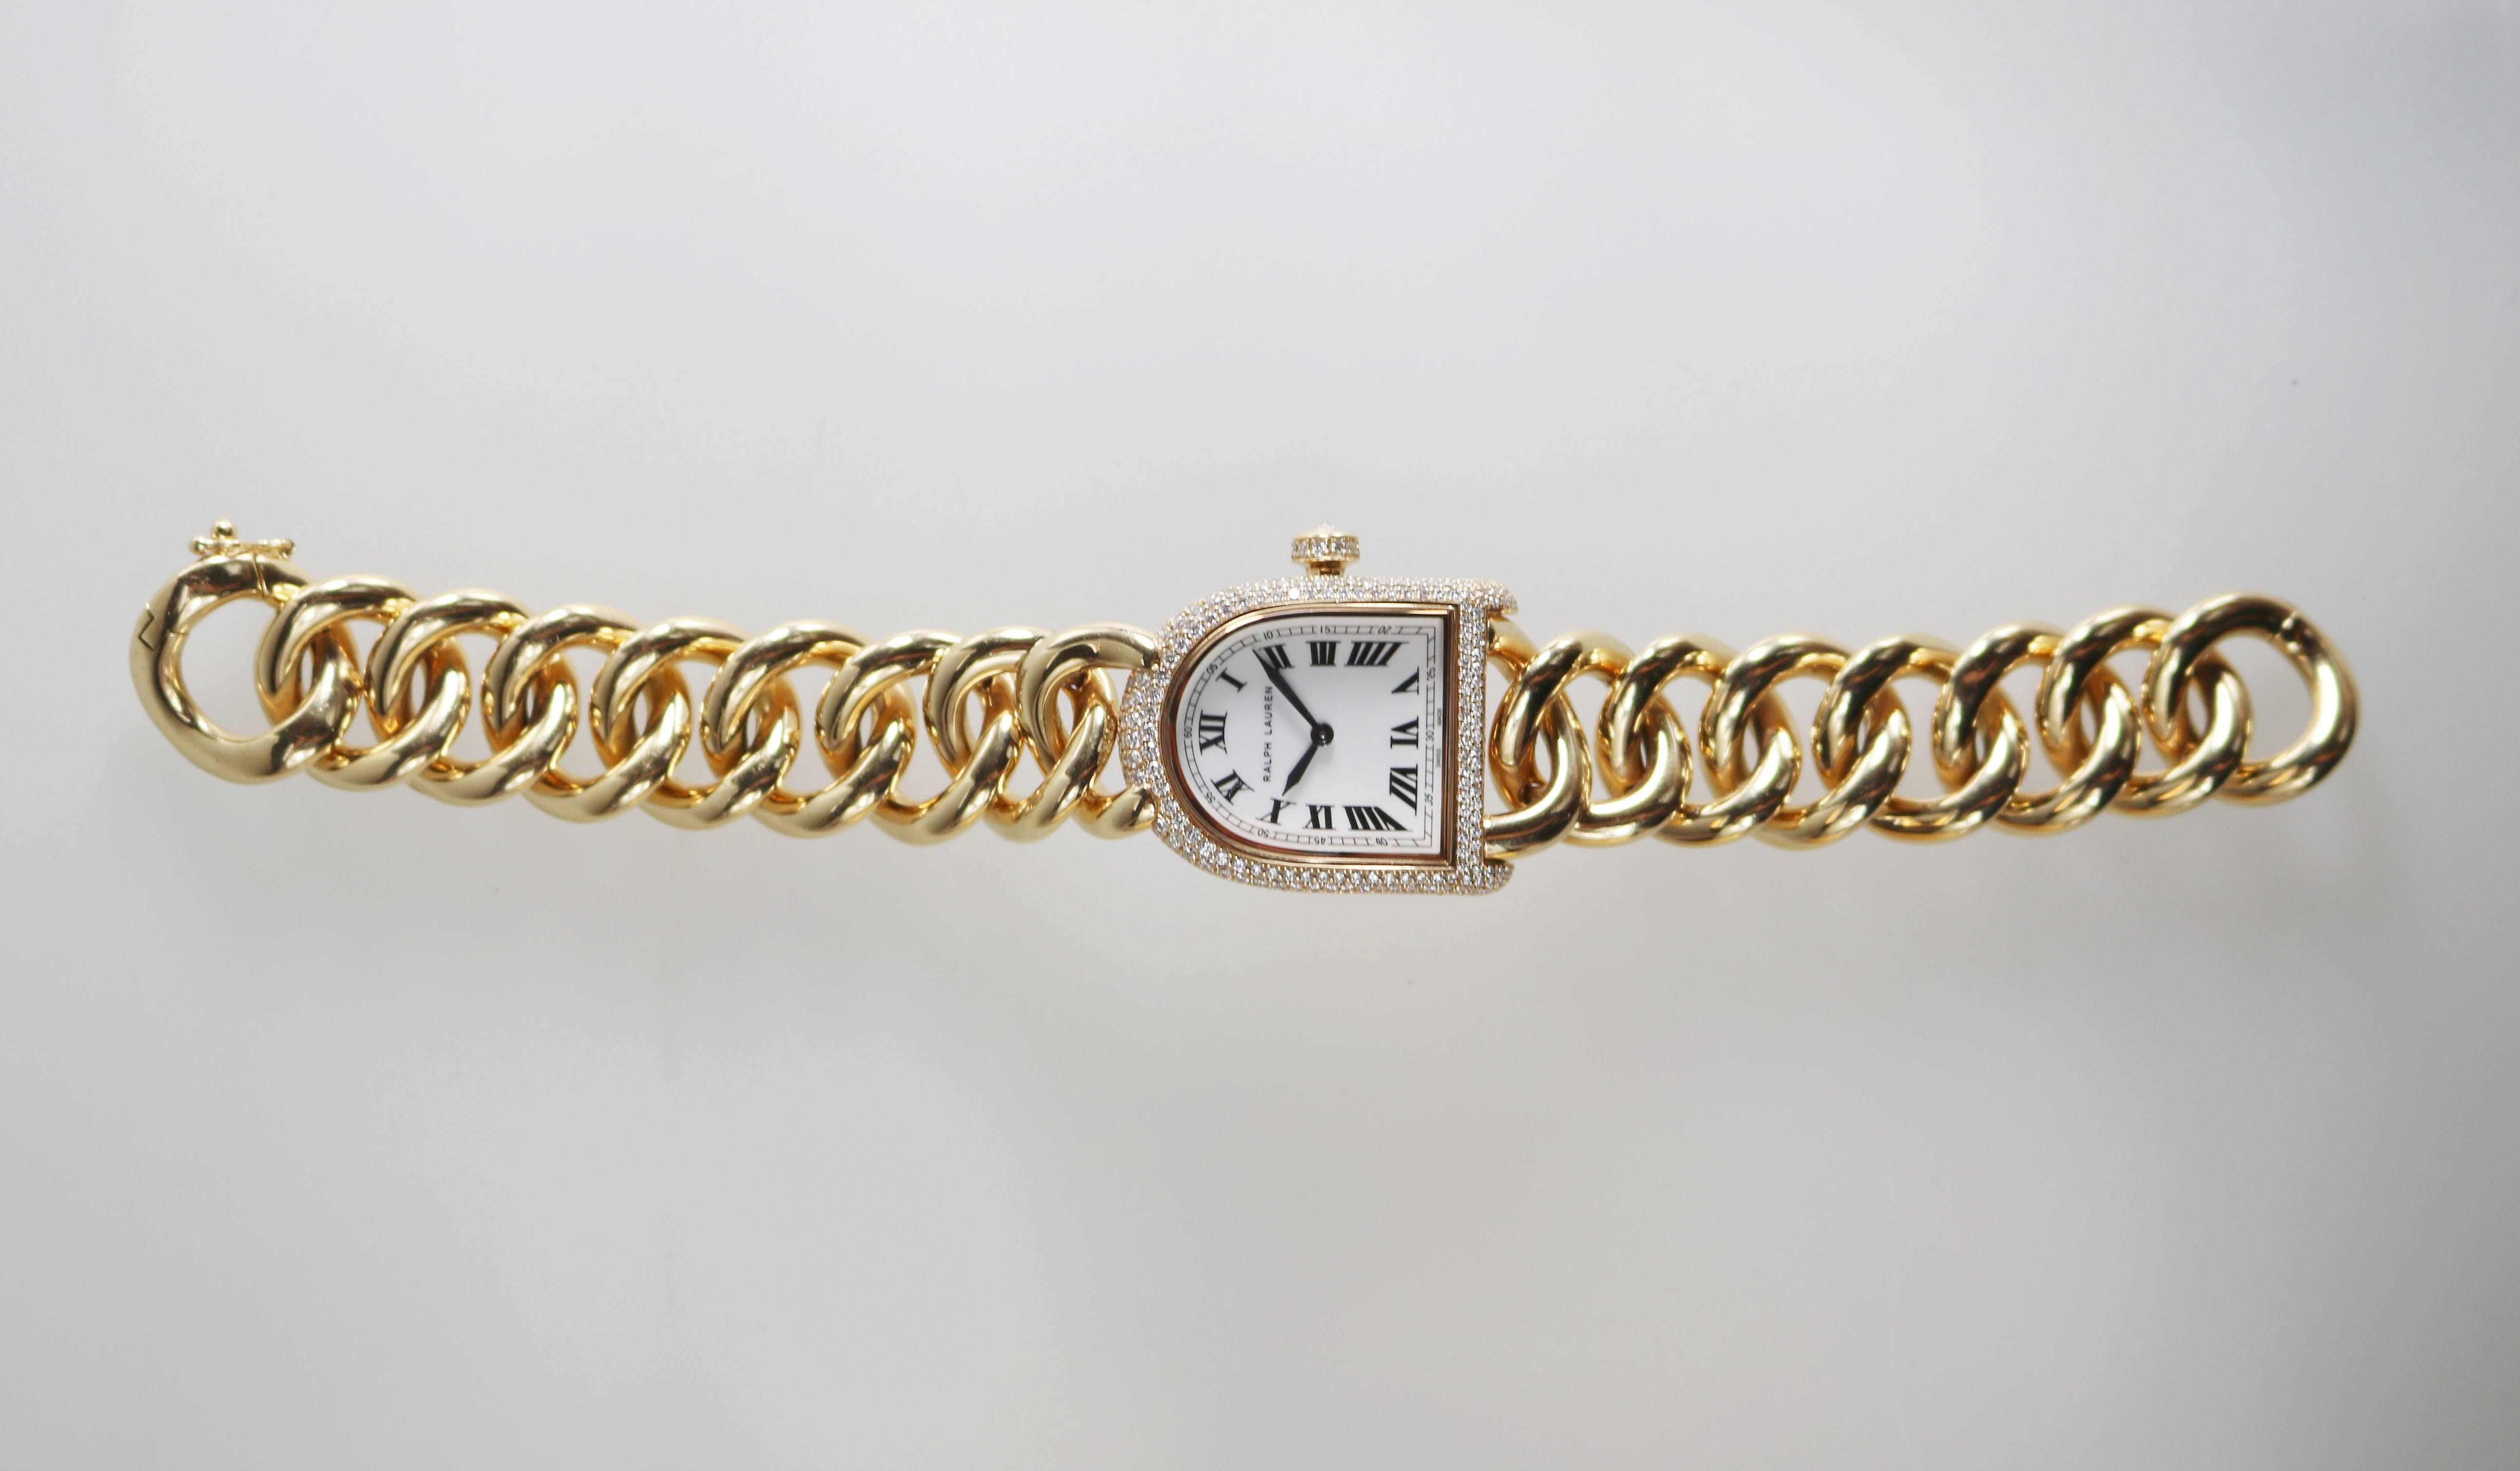 Ralph Lauren rose gold watch with 307 pave set diamonds weighing 1.30 carats. Signature stirrup-shaped case (23.3mm x 27mm) on a interlocking chain bracelet.  Length 6 1/4 inches. 

Current retail price is $42,000. 